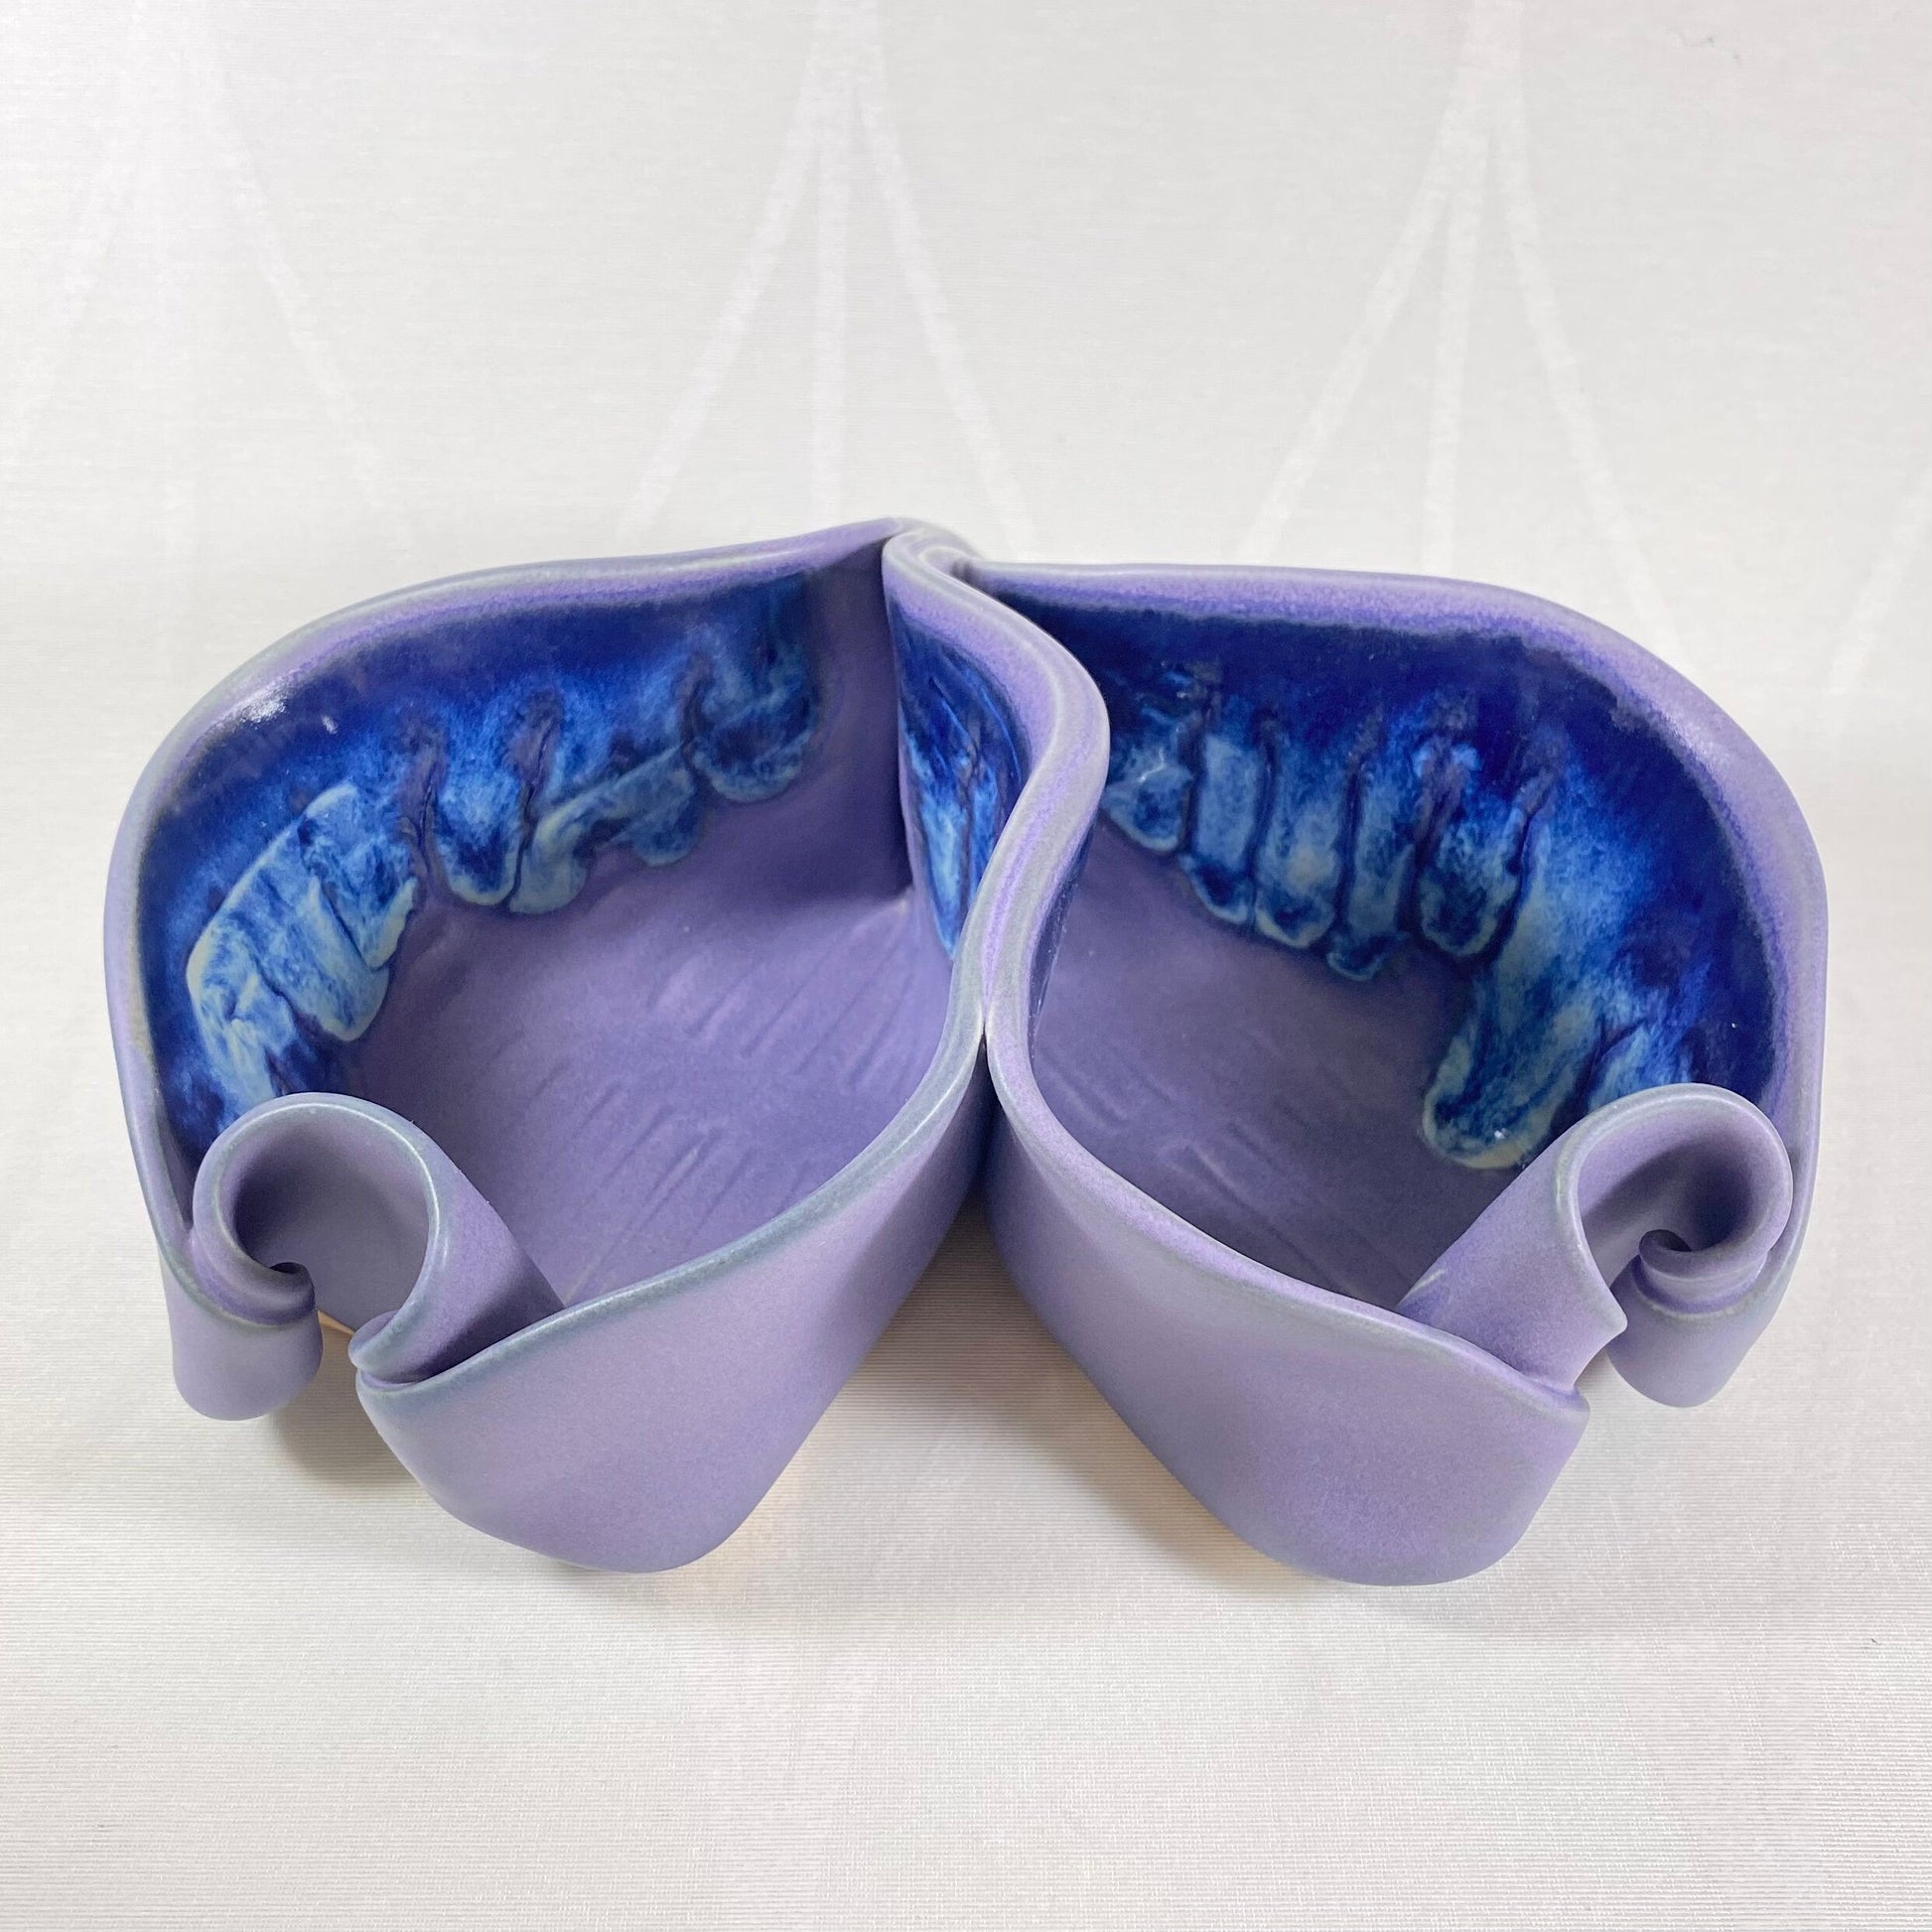 https://thenorthernlightsgallery.com/cdn/shop/files/handmade-purple-and-blue-double-sided-pistachio-bowl-with-serving-spoon-functional-996.jpg?v=1685990136&width=1946